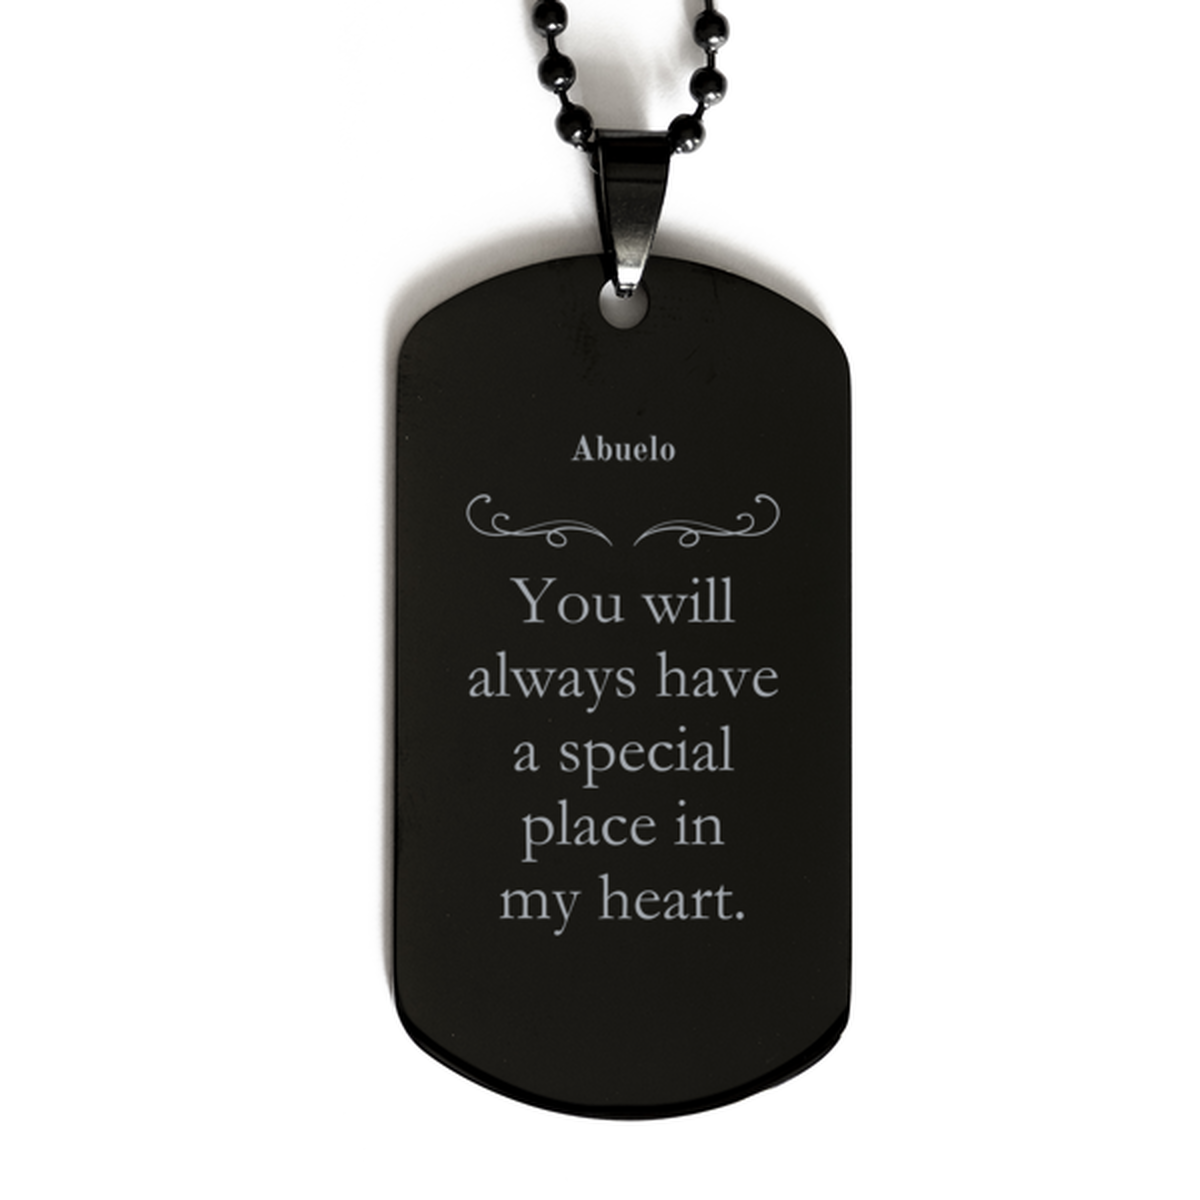 Abuelo Engraved Black Dog Tag - You will always have a special place in my heart - Unique Gift for Grandpa - Veterans Day, Christmas, Birthday, Graduation